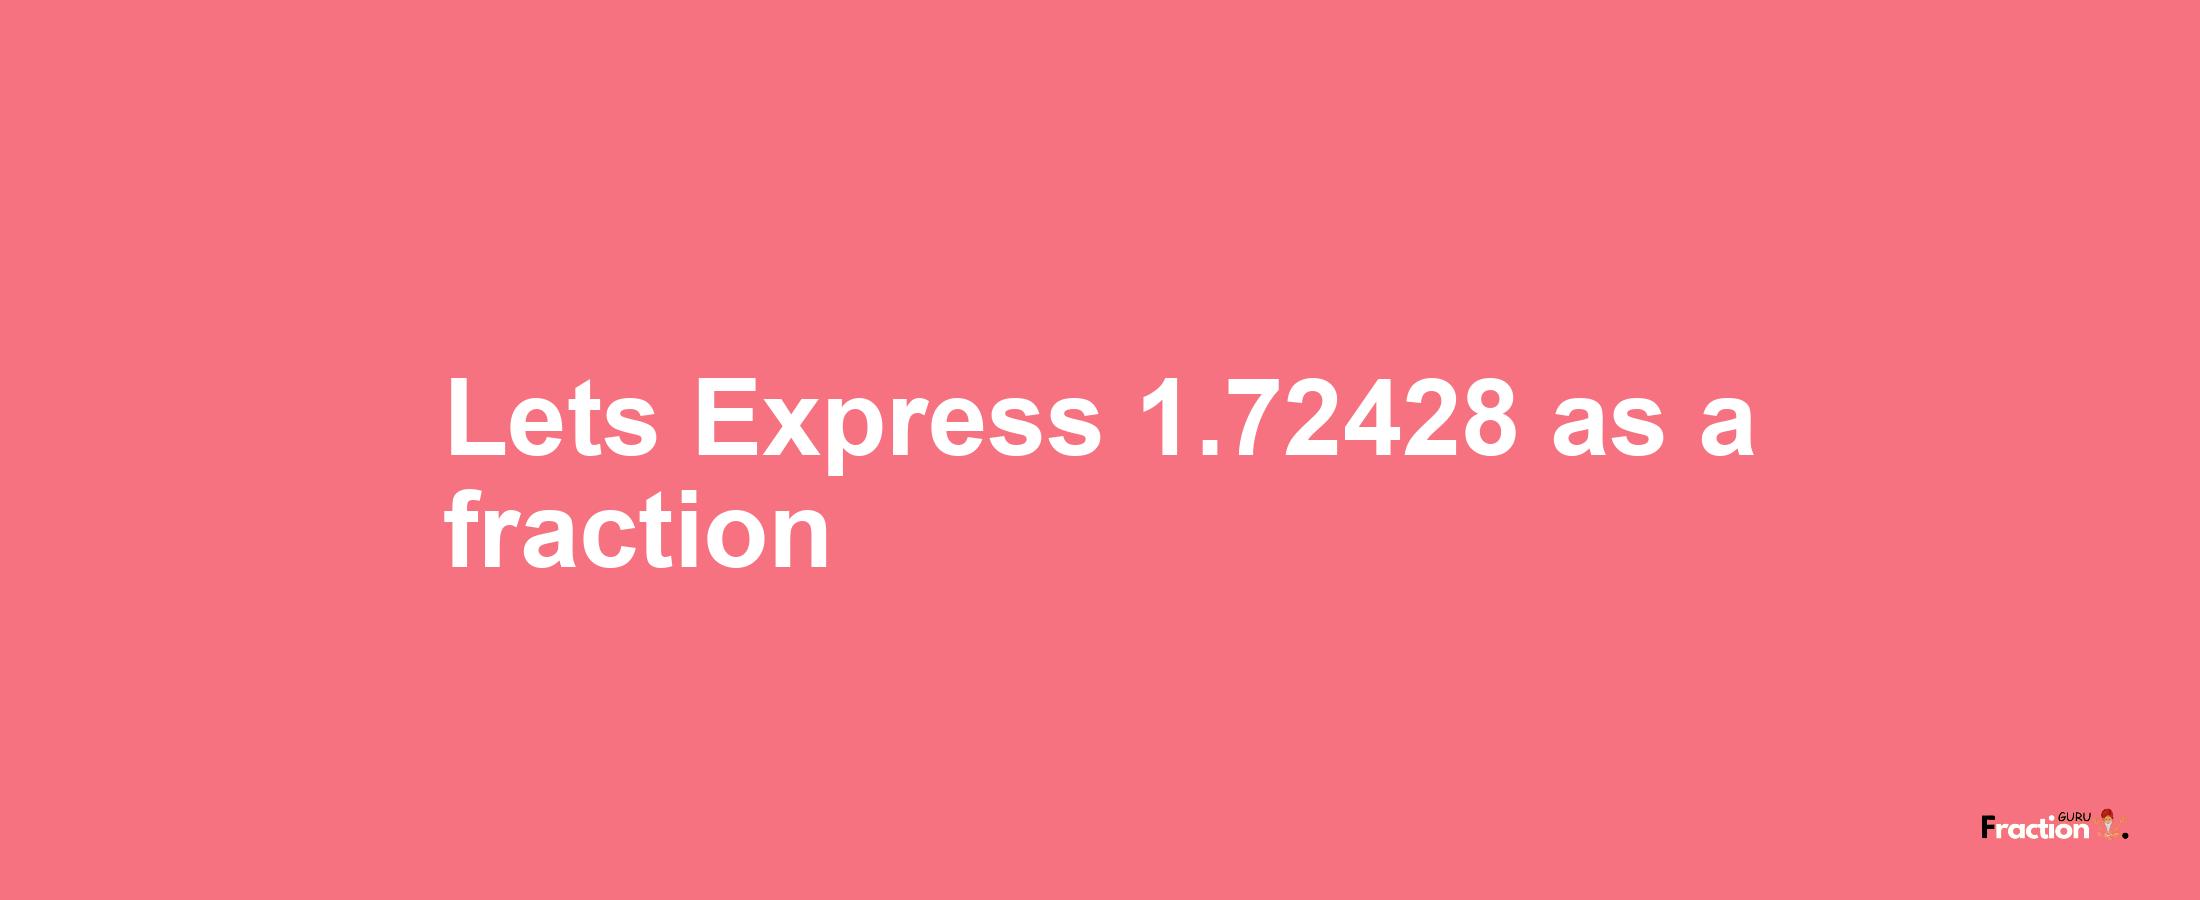 Lets Express 1.72428 as afraction